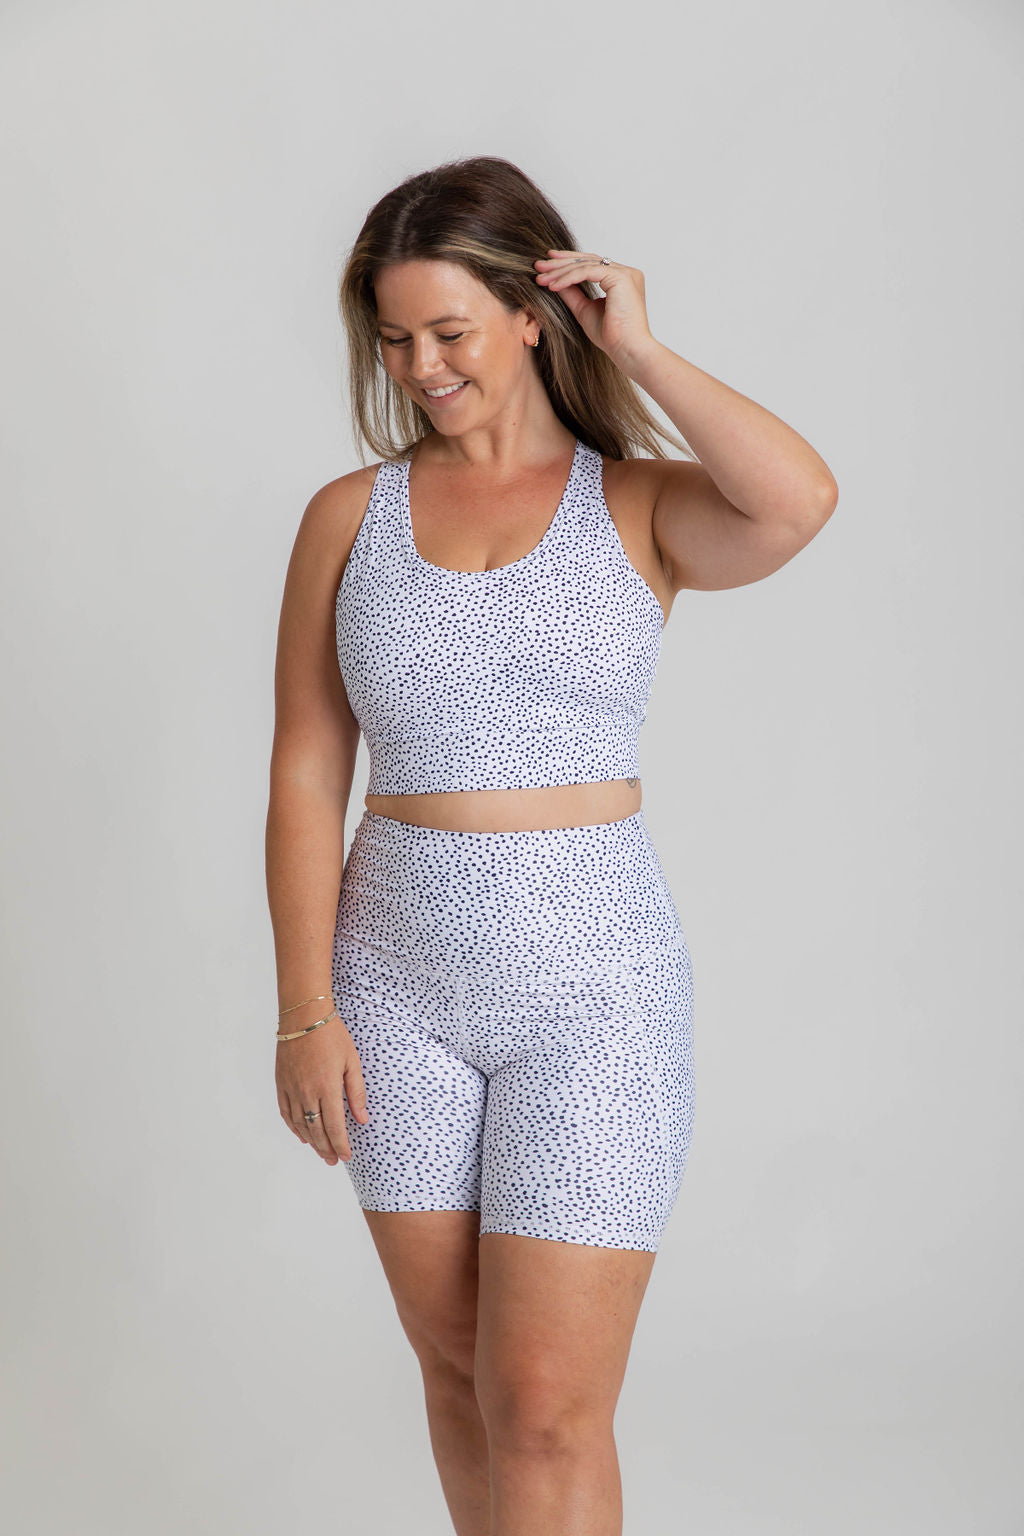 BEYOND SPORTS BRA - "THE ULTIMATE" MAXIMUM SUPPORT + MAX COVERAGE - DOTTY WHITE